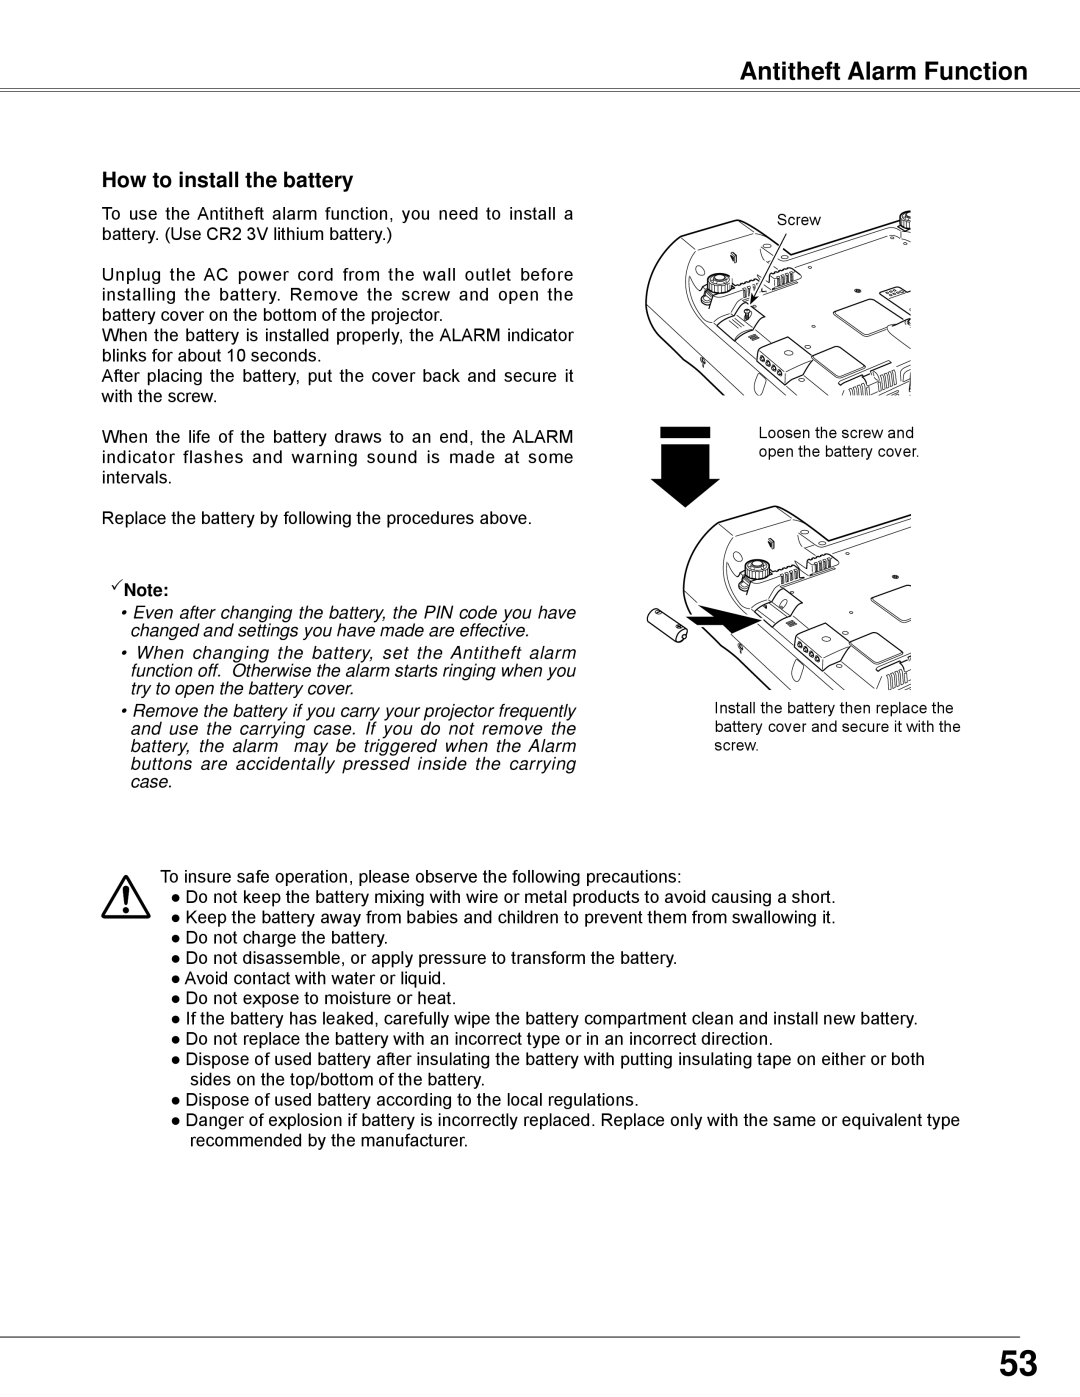 Sanyo PLC-WXE45 owner manual How to install the battery, Antitheft Alarm Function, Note 